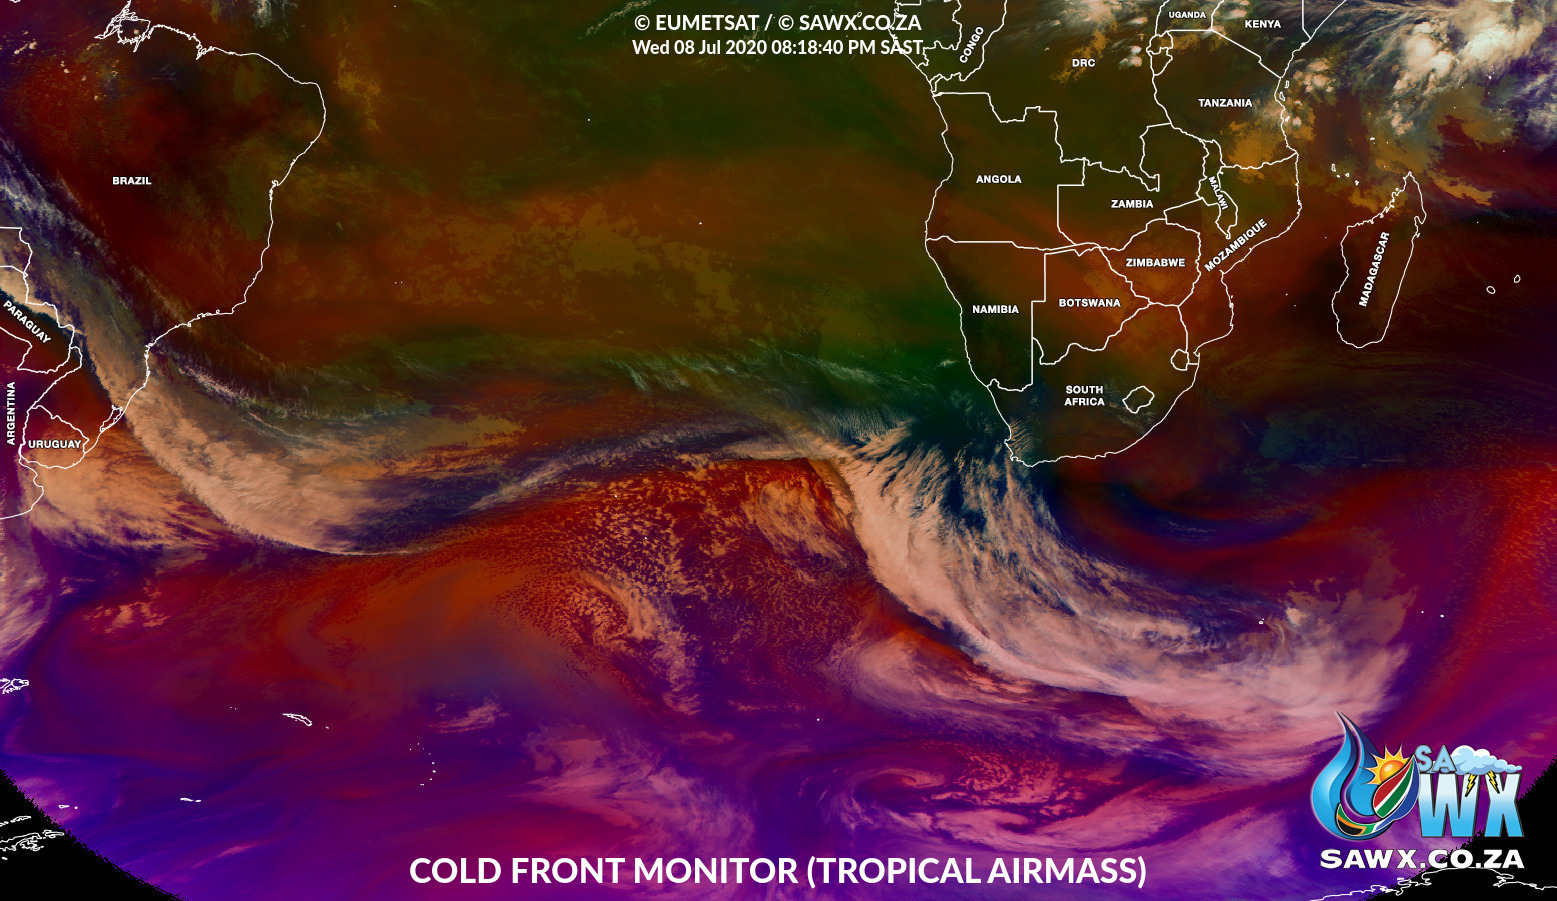 3 Cold Fronts to hit South Africa - Lesotho to see heaviest snowfall of all 18